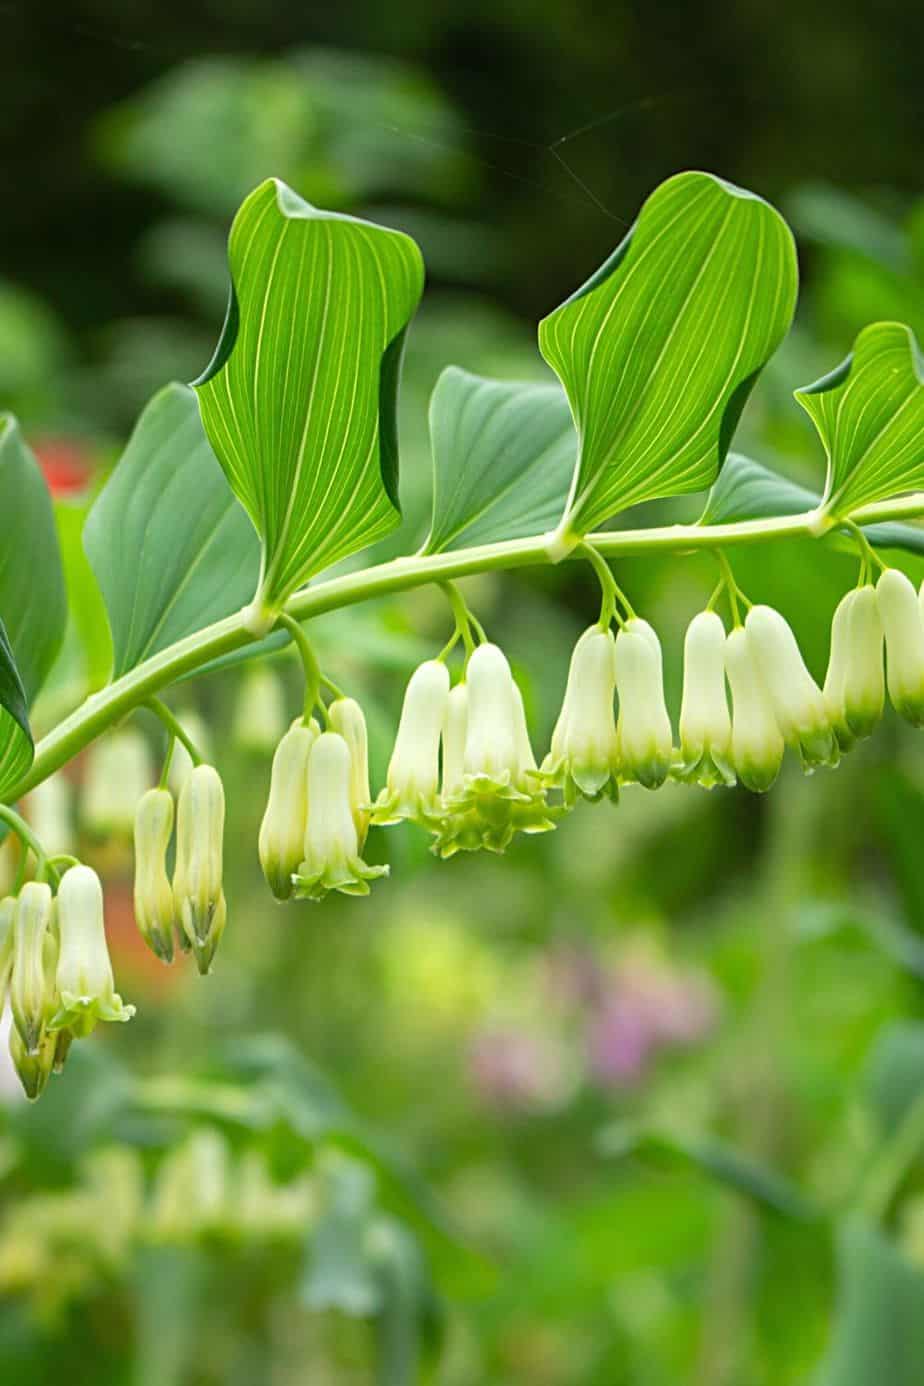 Solomon’s seal loves the shade in the mornings and sunlight during the day of the west-facing side of the house